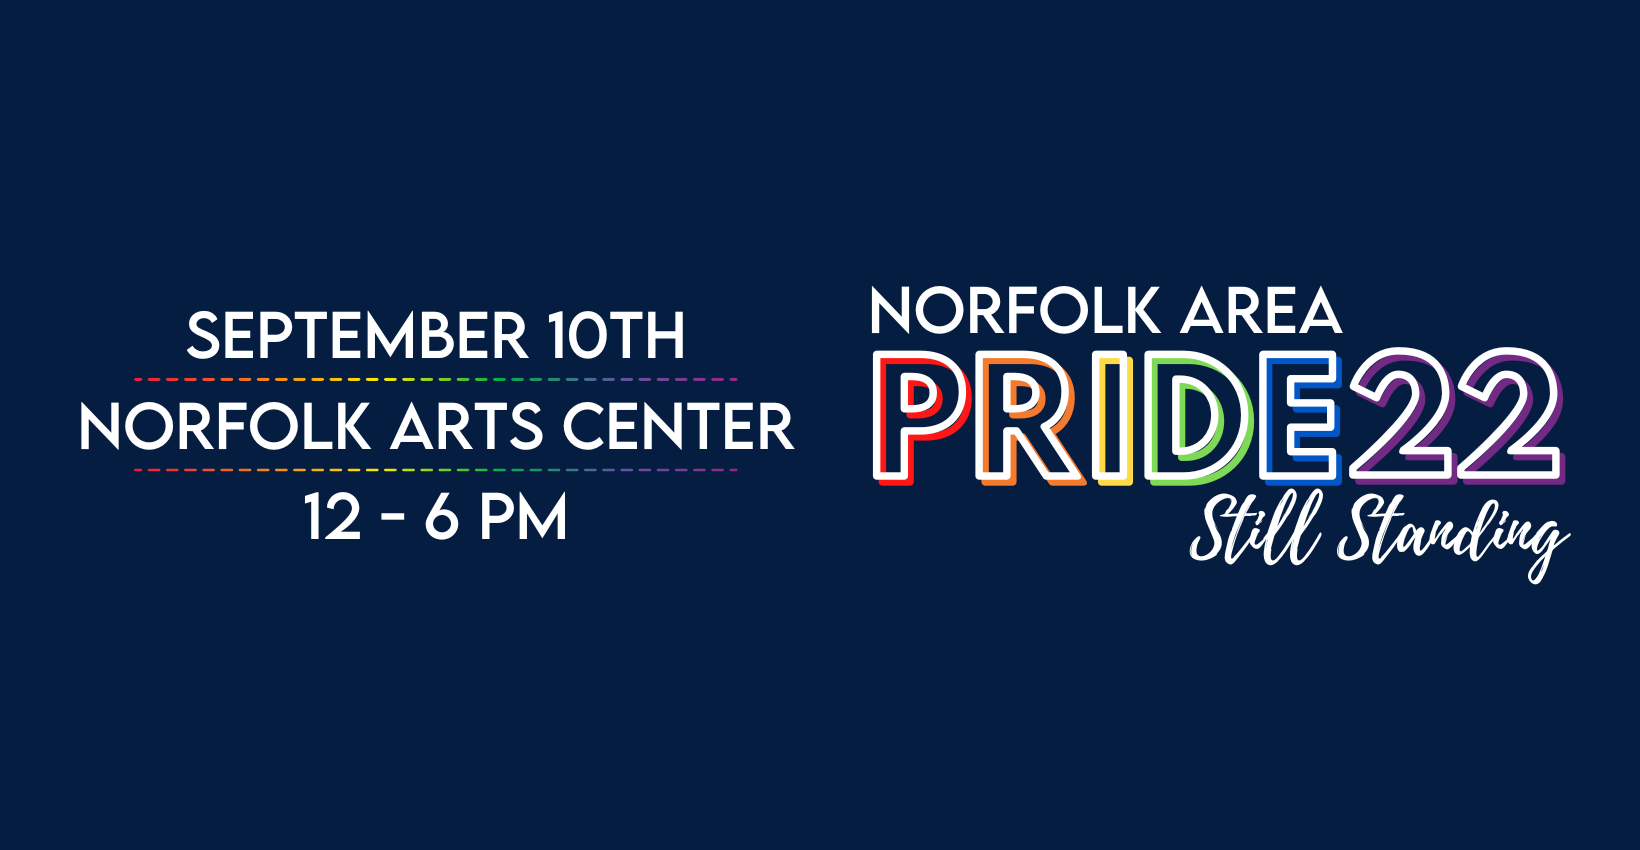 Solid navy blue background. Text overtop with rainbow accents: September 10th Norfolk Arts Center 12-6 PM. Norfolk Area Pride 22: Still Standing.